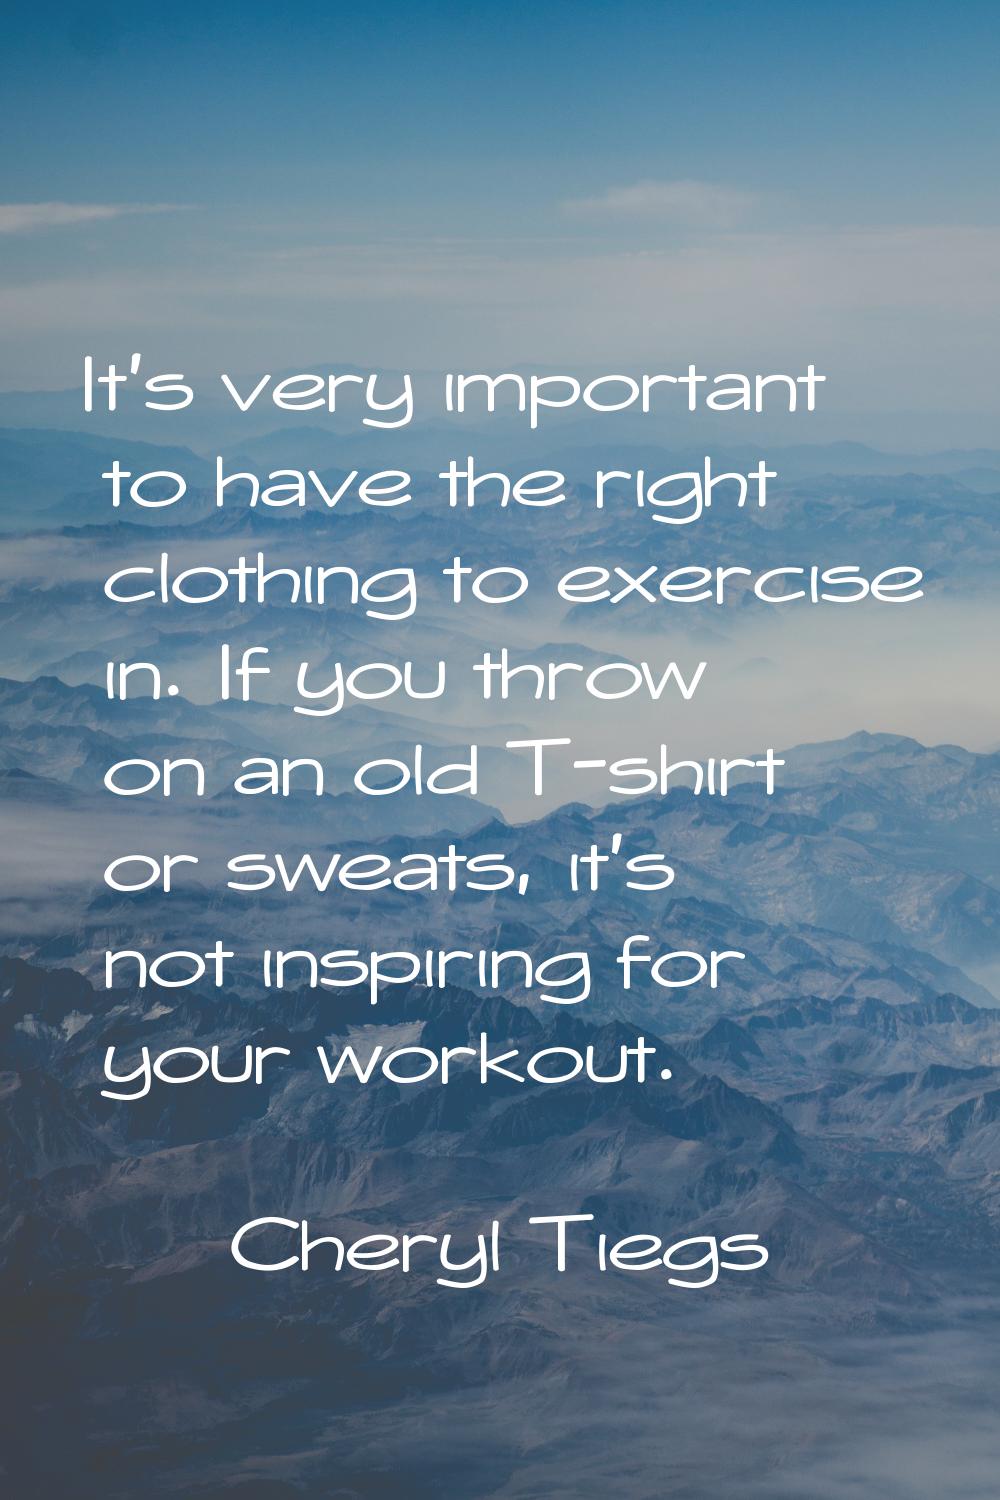 It's very important to have the right clothing to exercise in. If you throw on an old T-shirt or sw